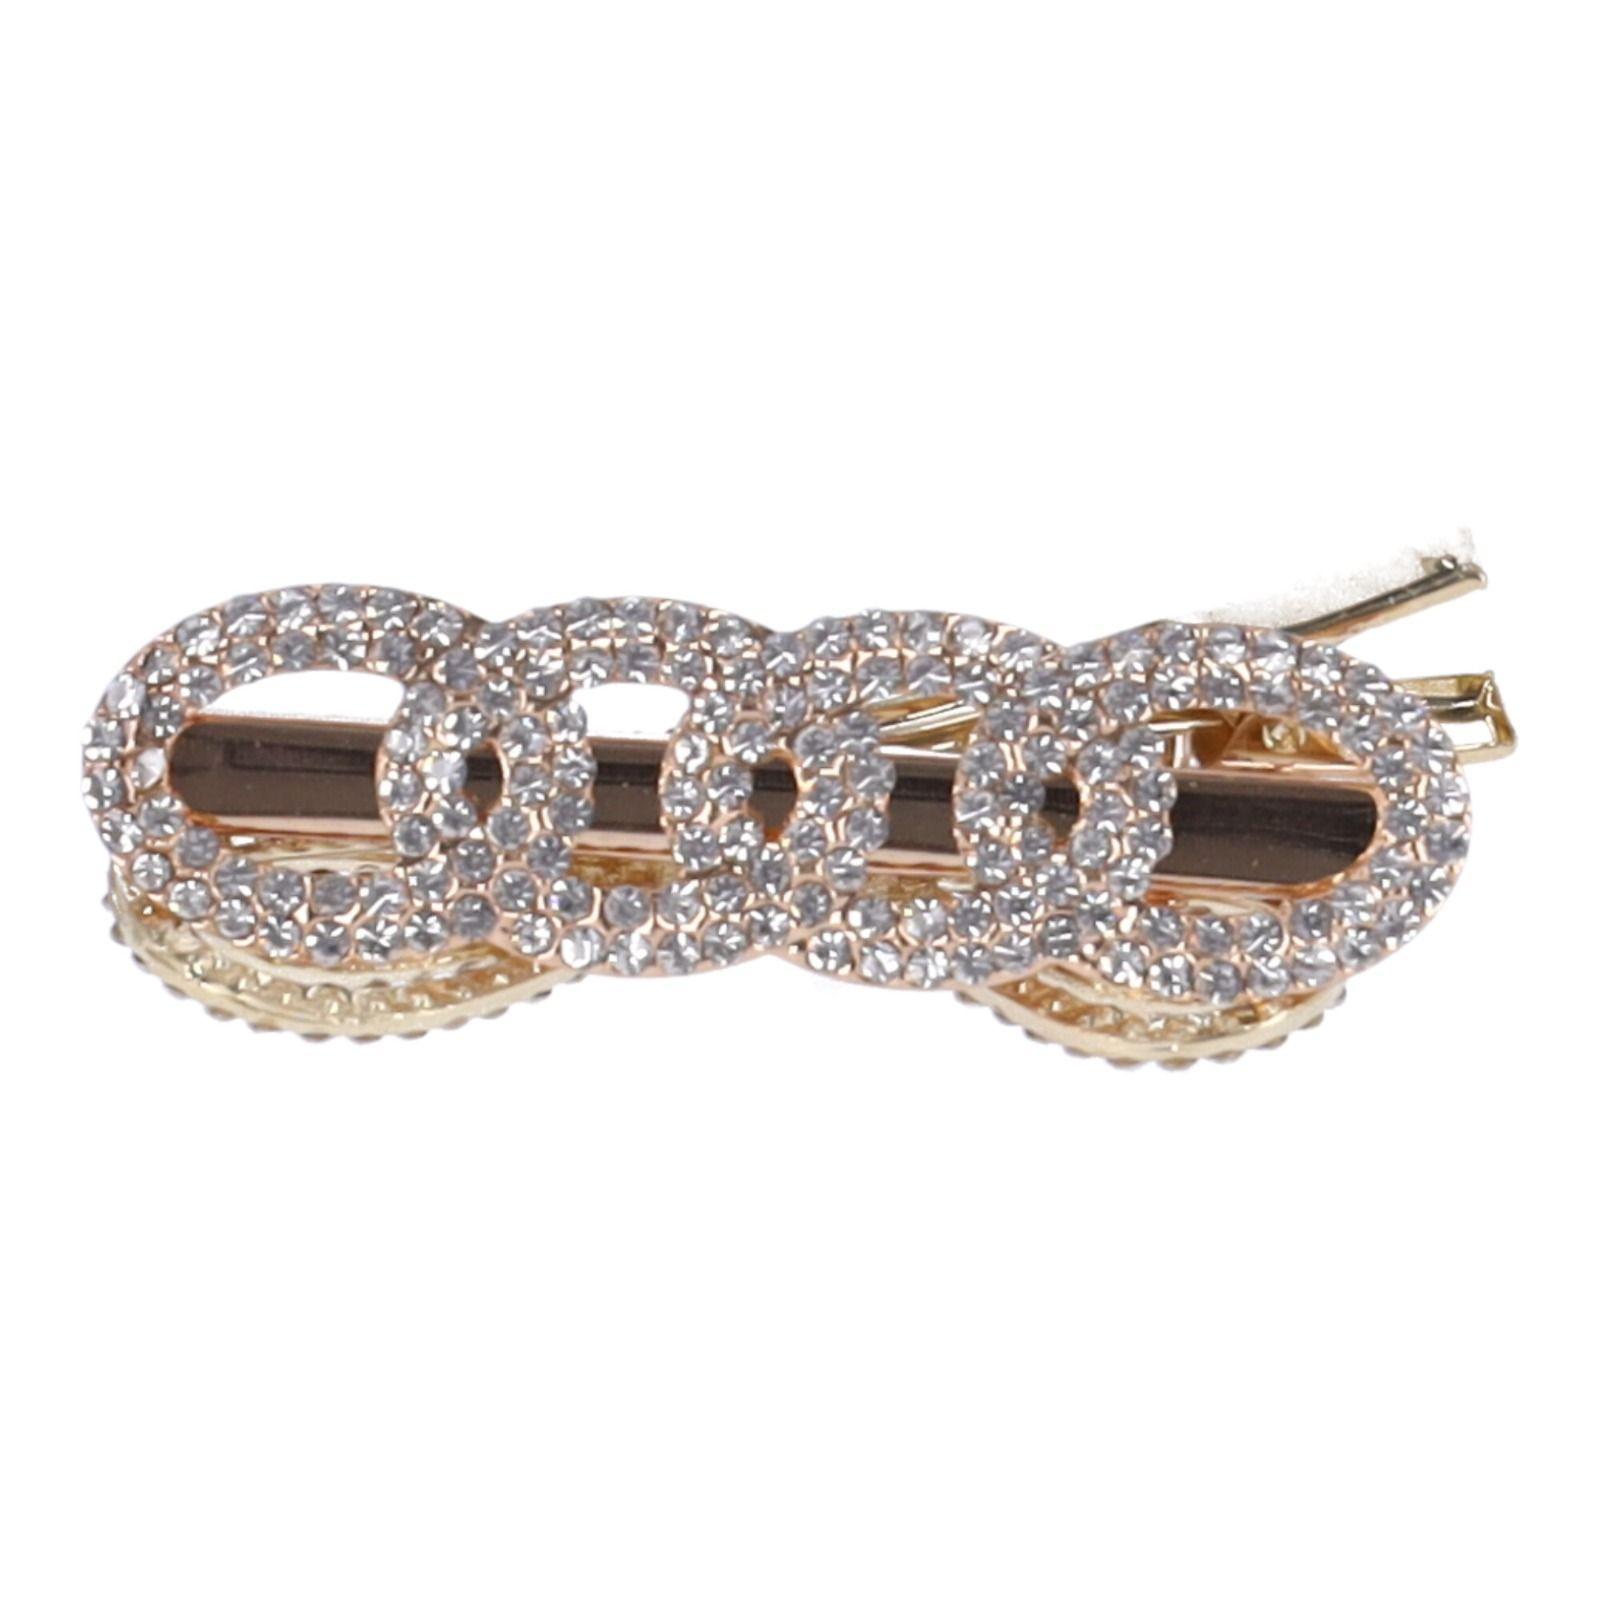 Hairpins, hairpins BLING 2 pcs. - gold, type III